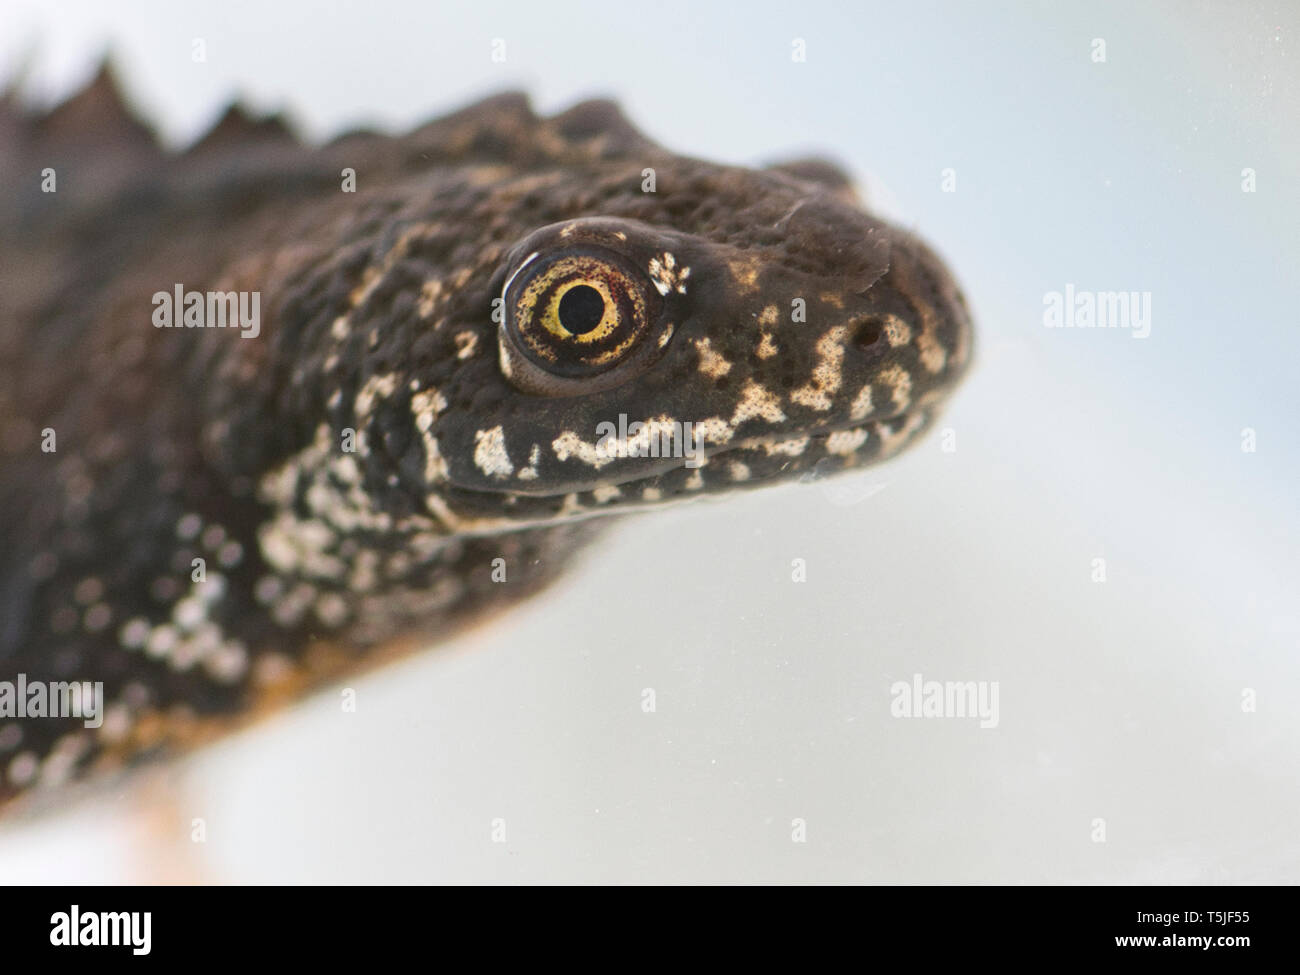 Head of a male Great crested newt (Triturus cristatus), photographed during the breeding season. Photographed in controlled conditions. Stock Photo